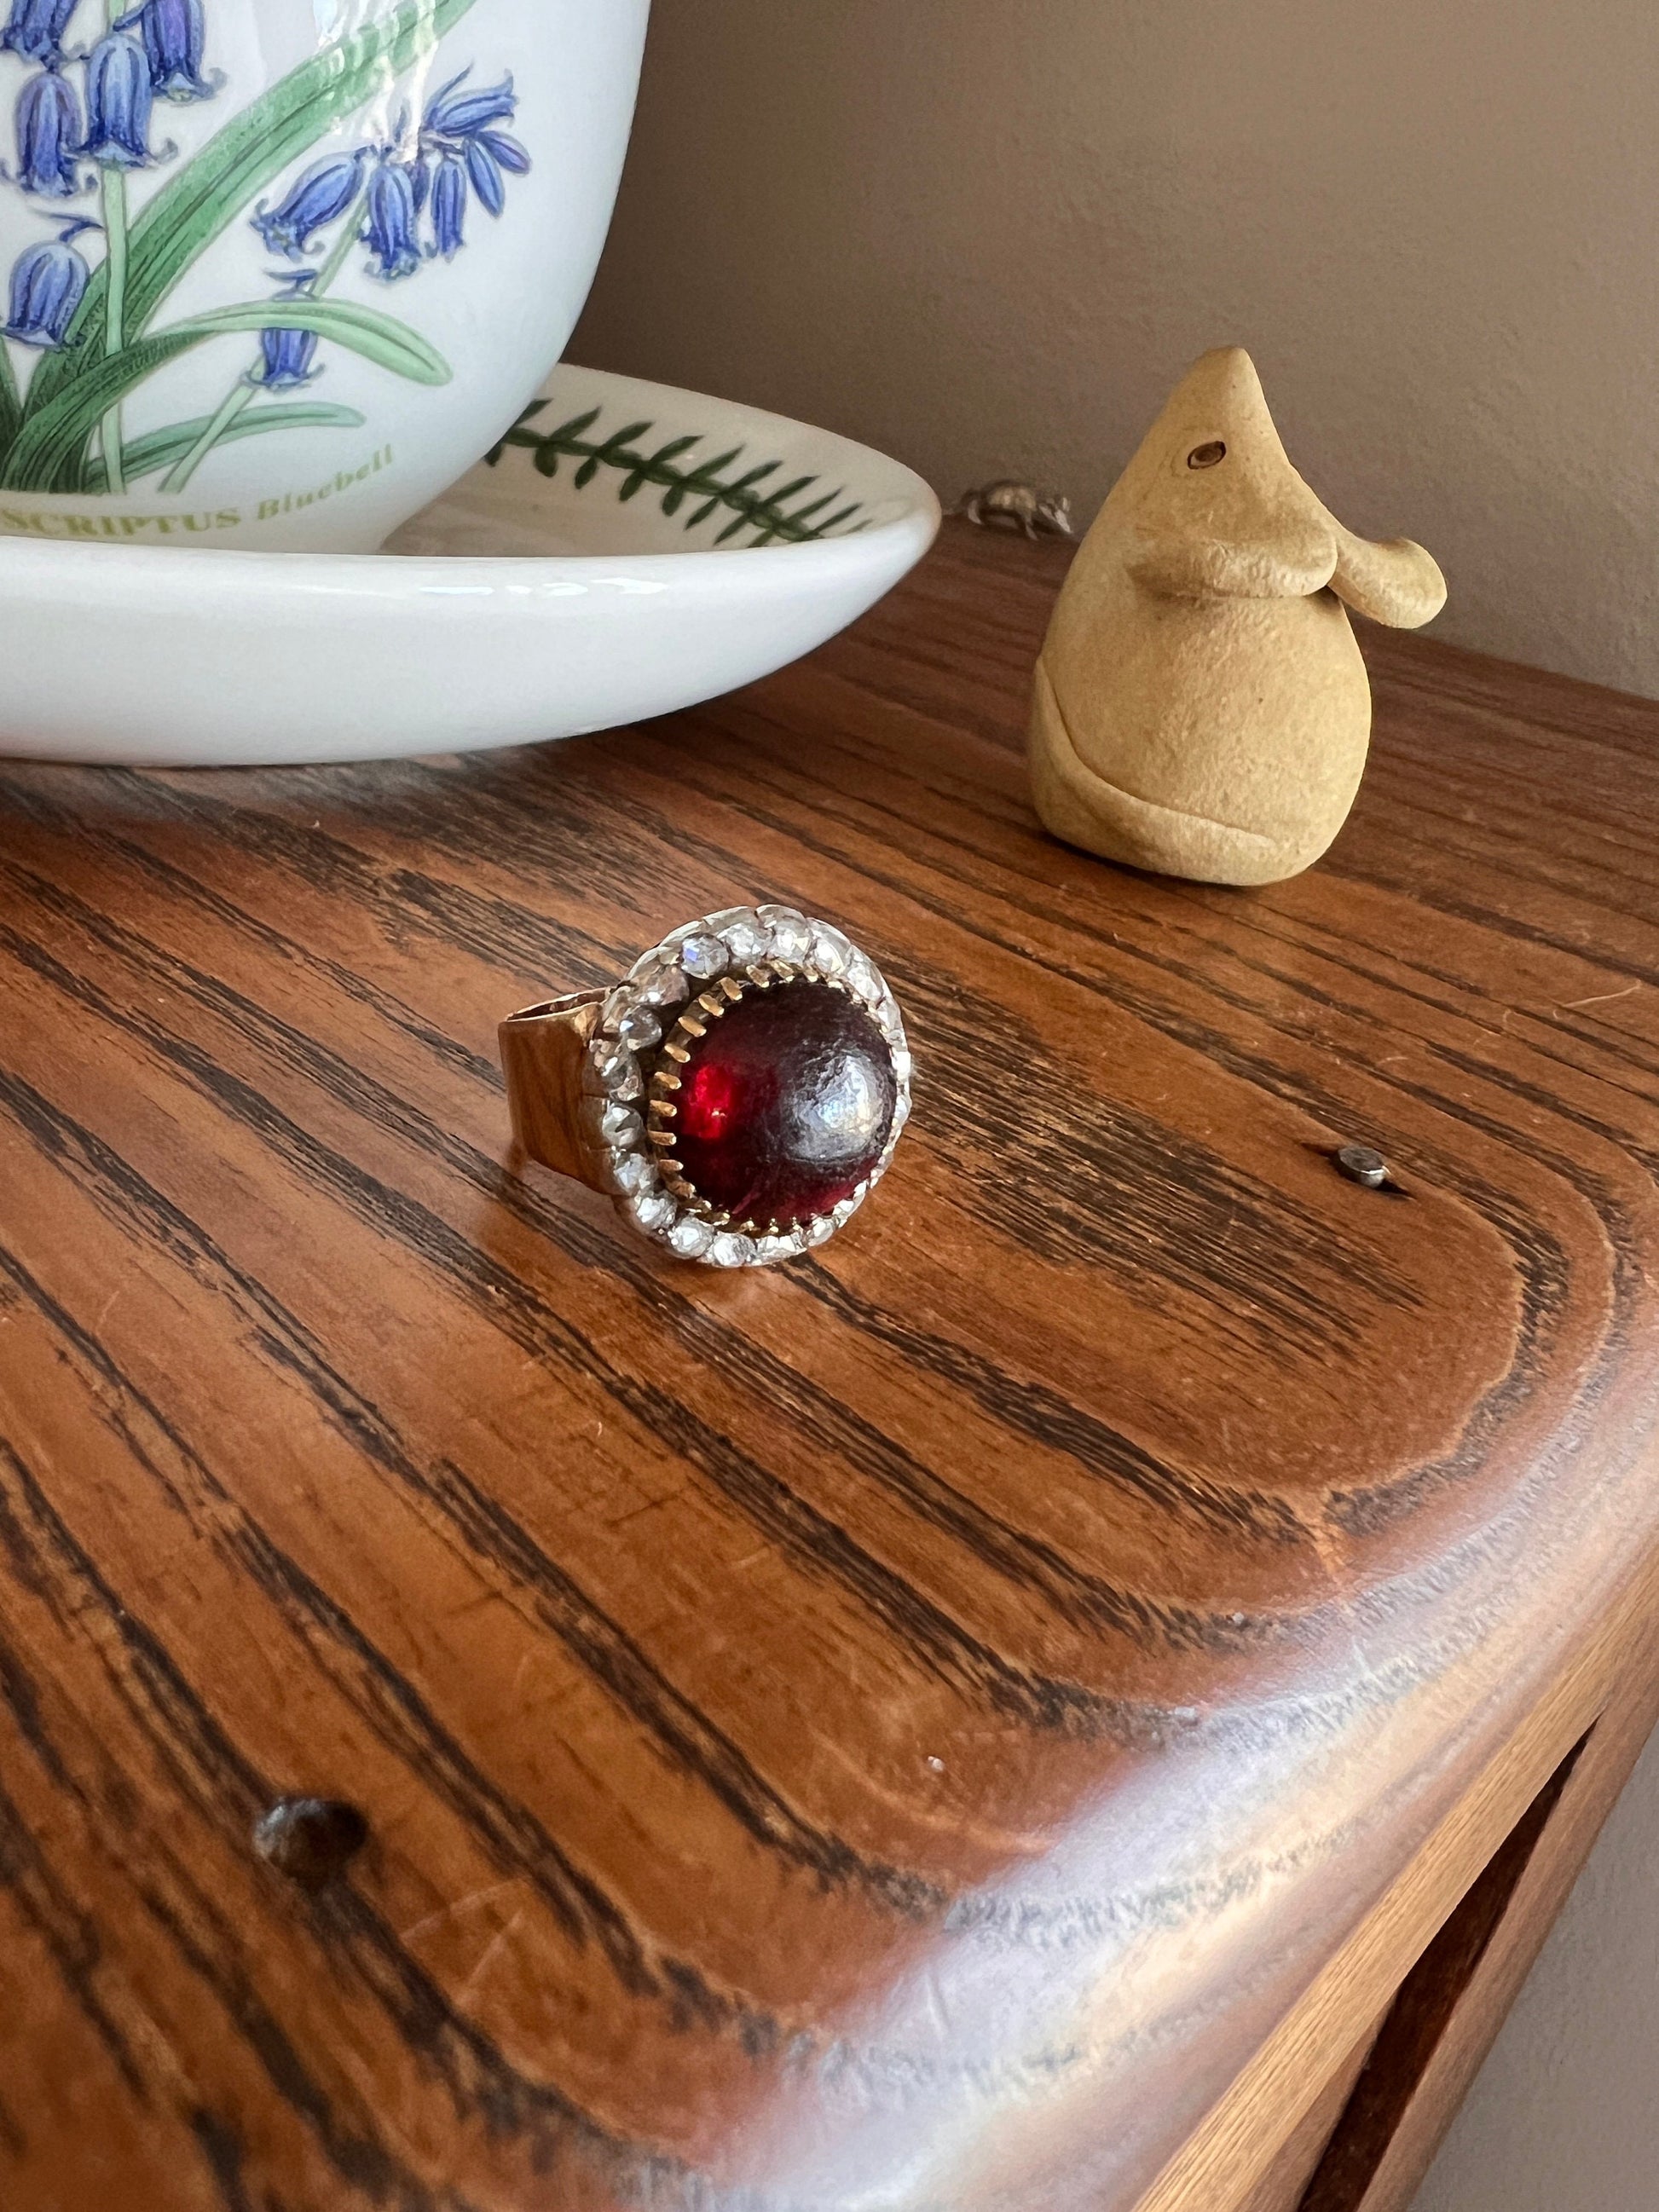 Glowing Cabochon Red GARNET Rose Cut Diamond Halo Ring French Antique 18k Gold Silver Victorian Juicy Crimson Romantic Gift Round Bauble